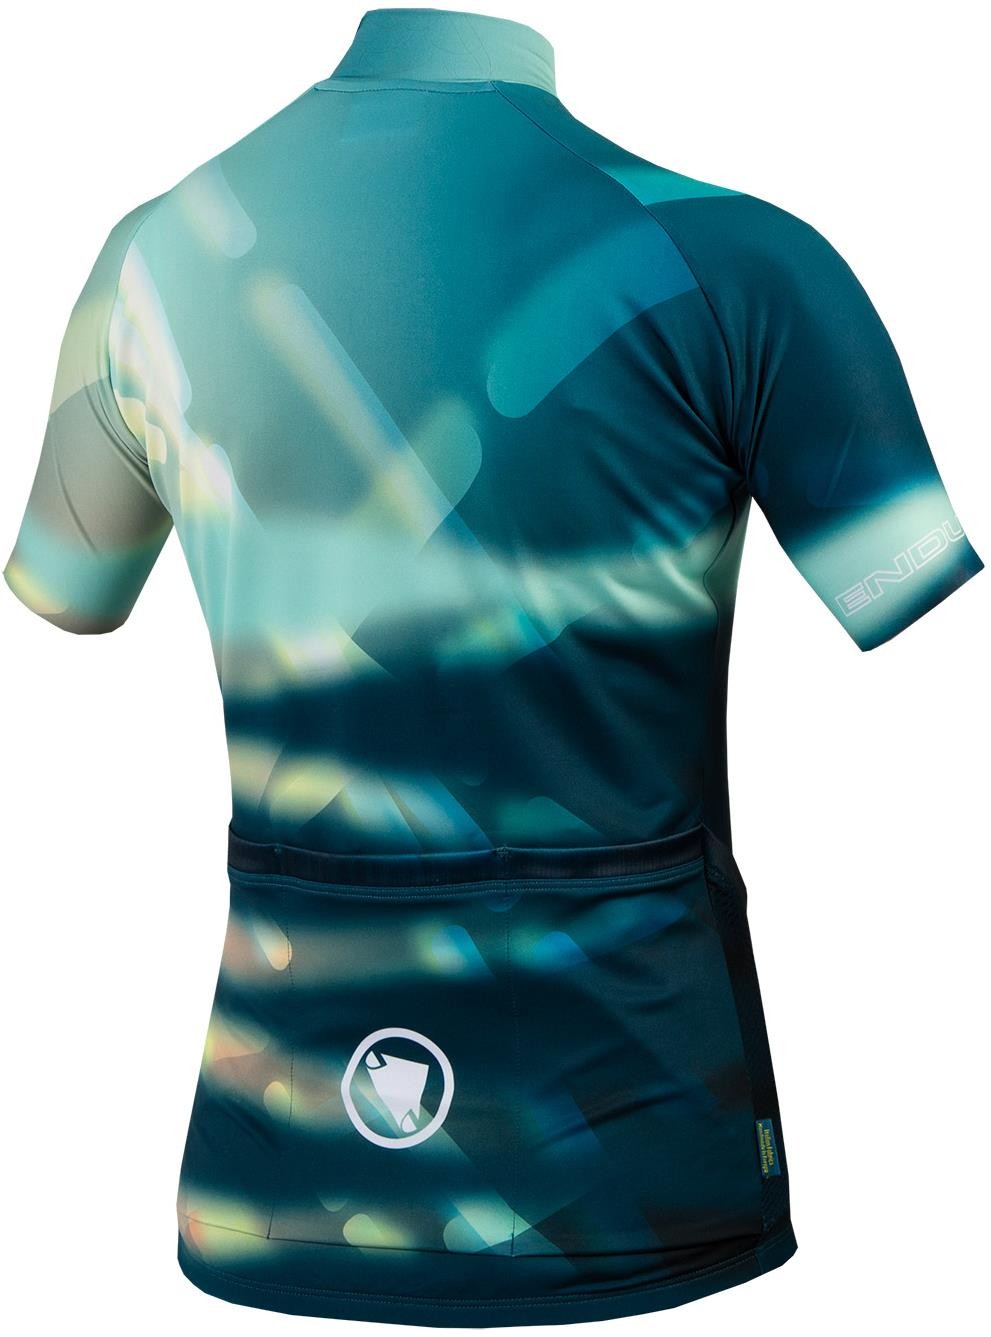 Virtual Texture Womens Short Sleeve Cycling Jersey Limited Edition image 1